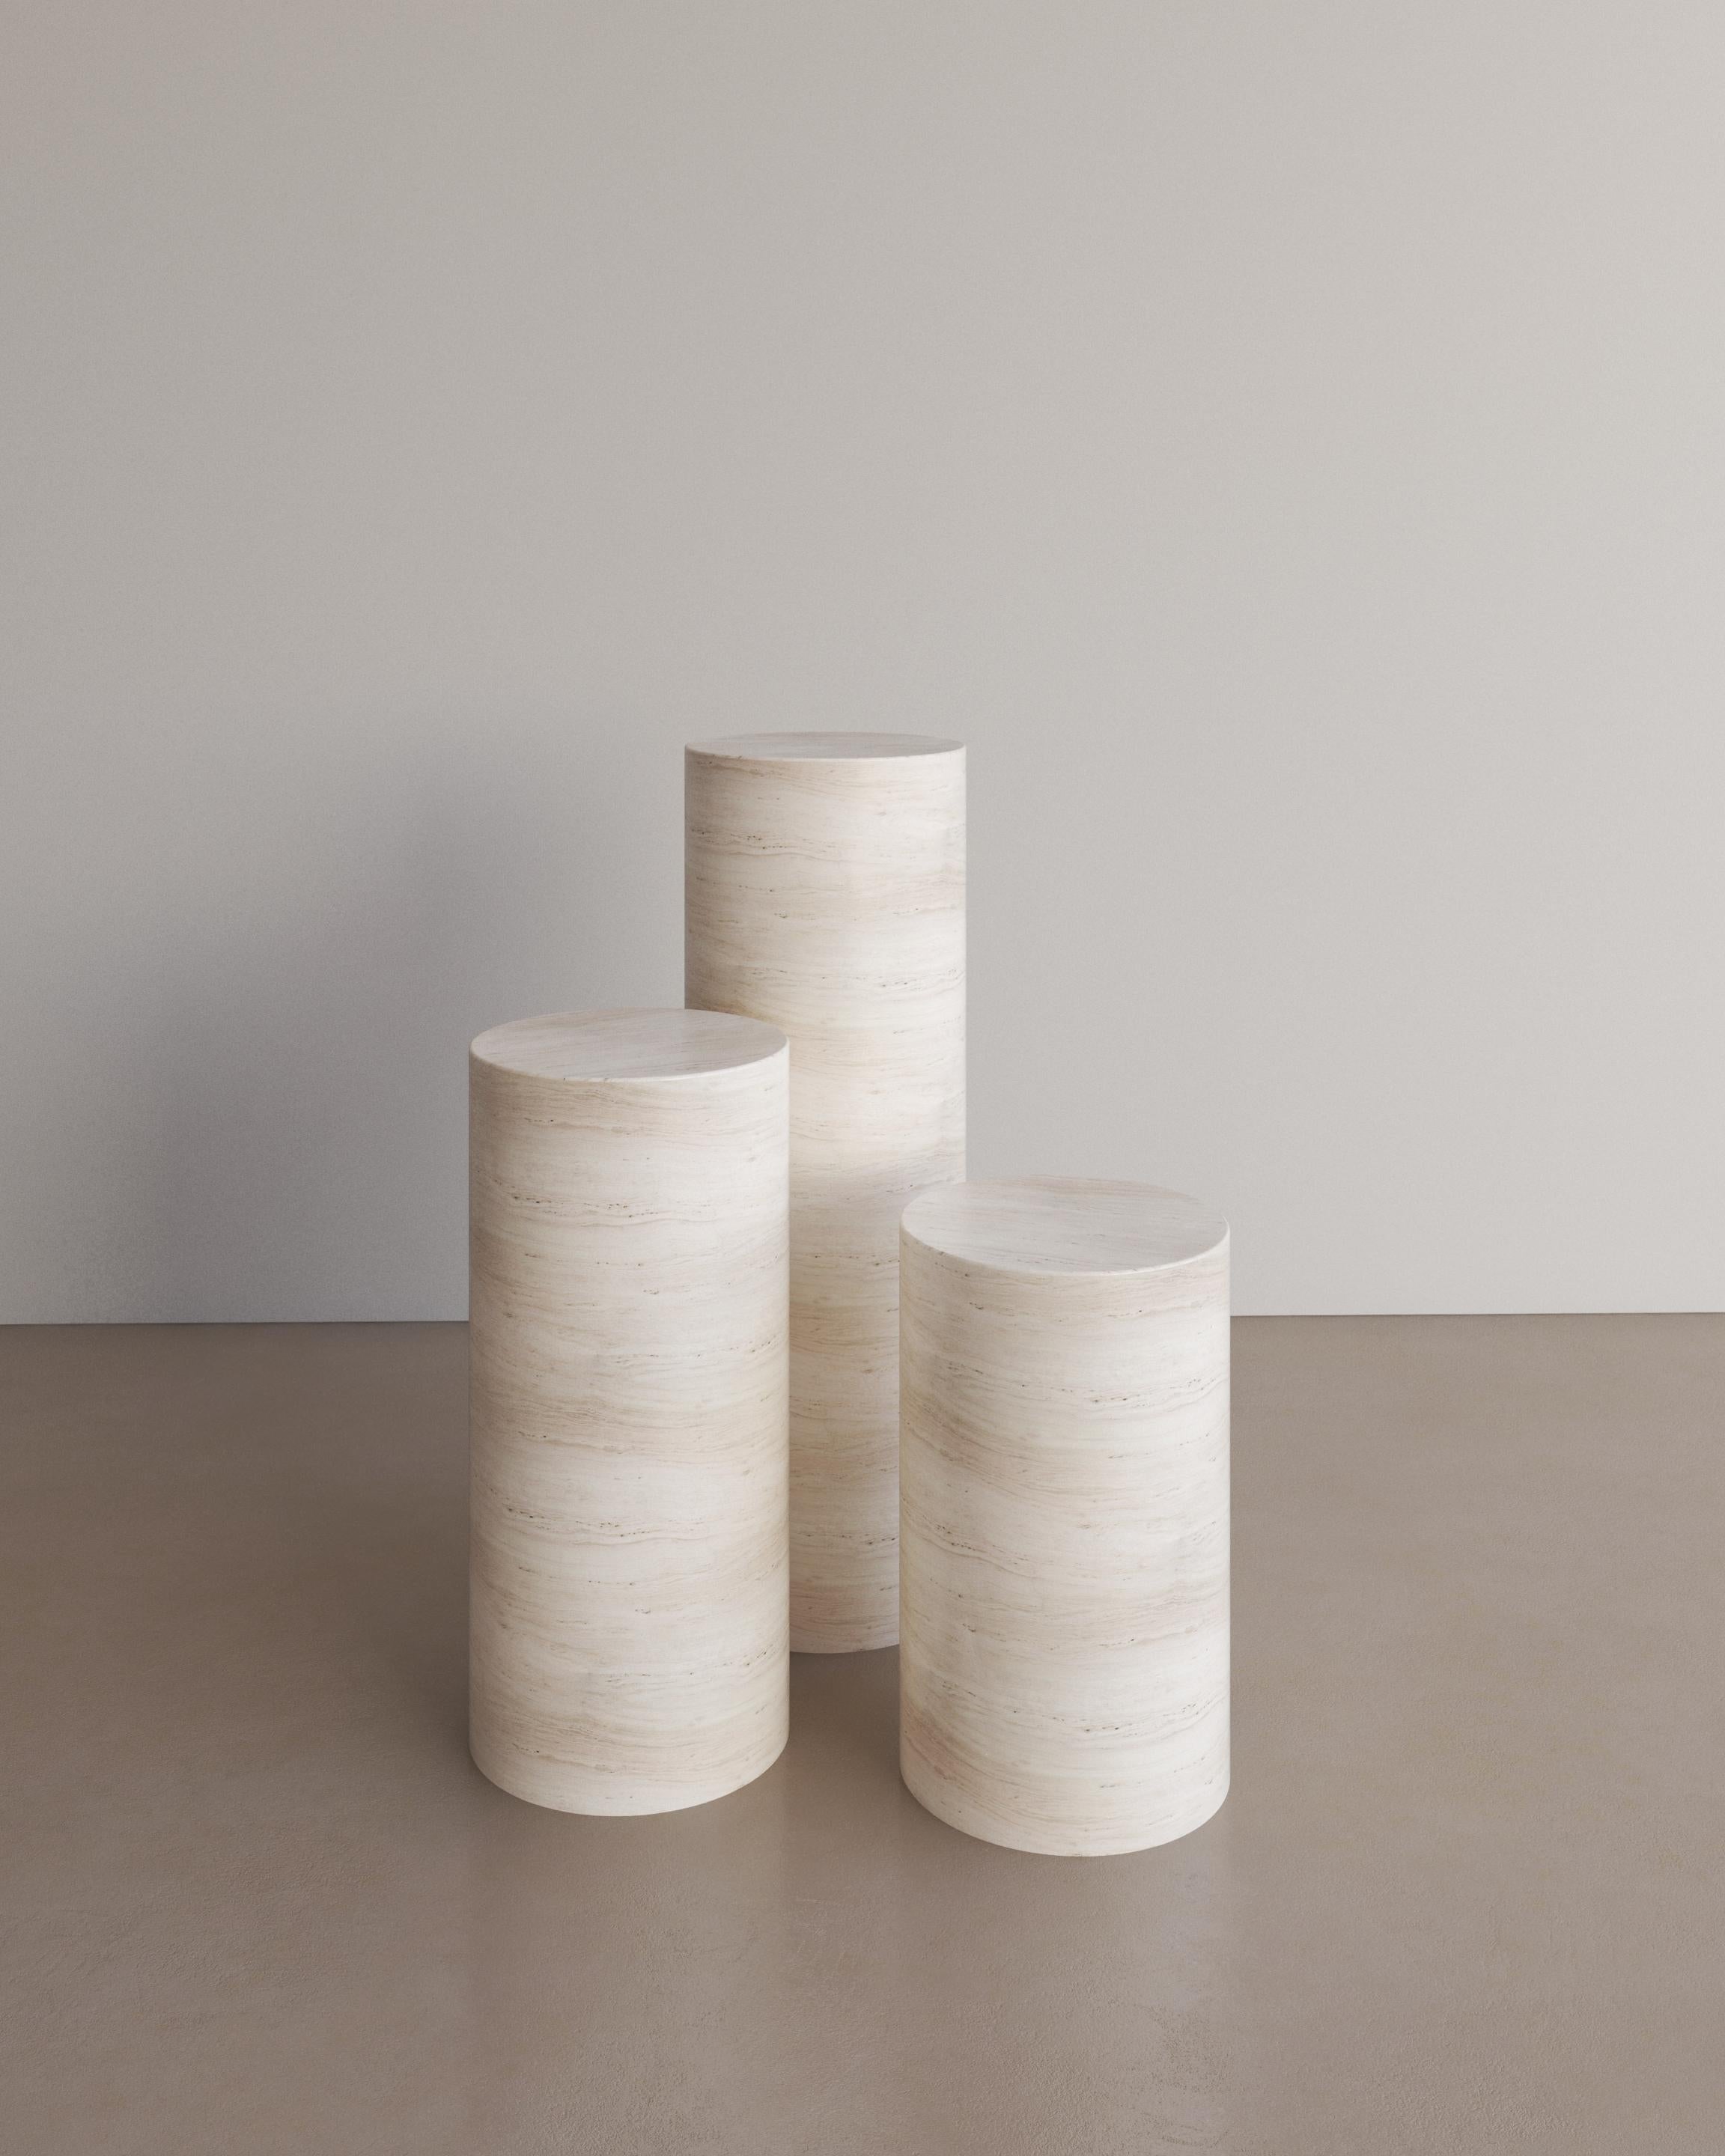 The Voyage Pedestal in Bianco Travertine by The Essentialist is envisioned as an ode to historical elegance, captured through a modern lens of minimalistic opulence. Play with scale and verticality by positioning two or three varying heights within